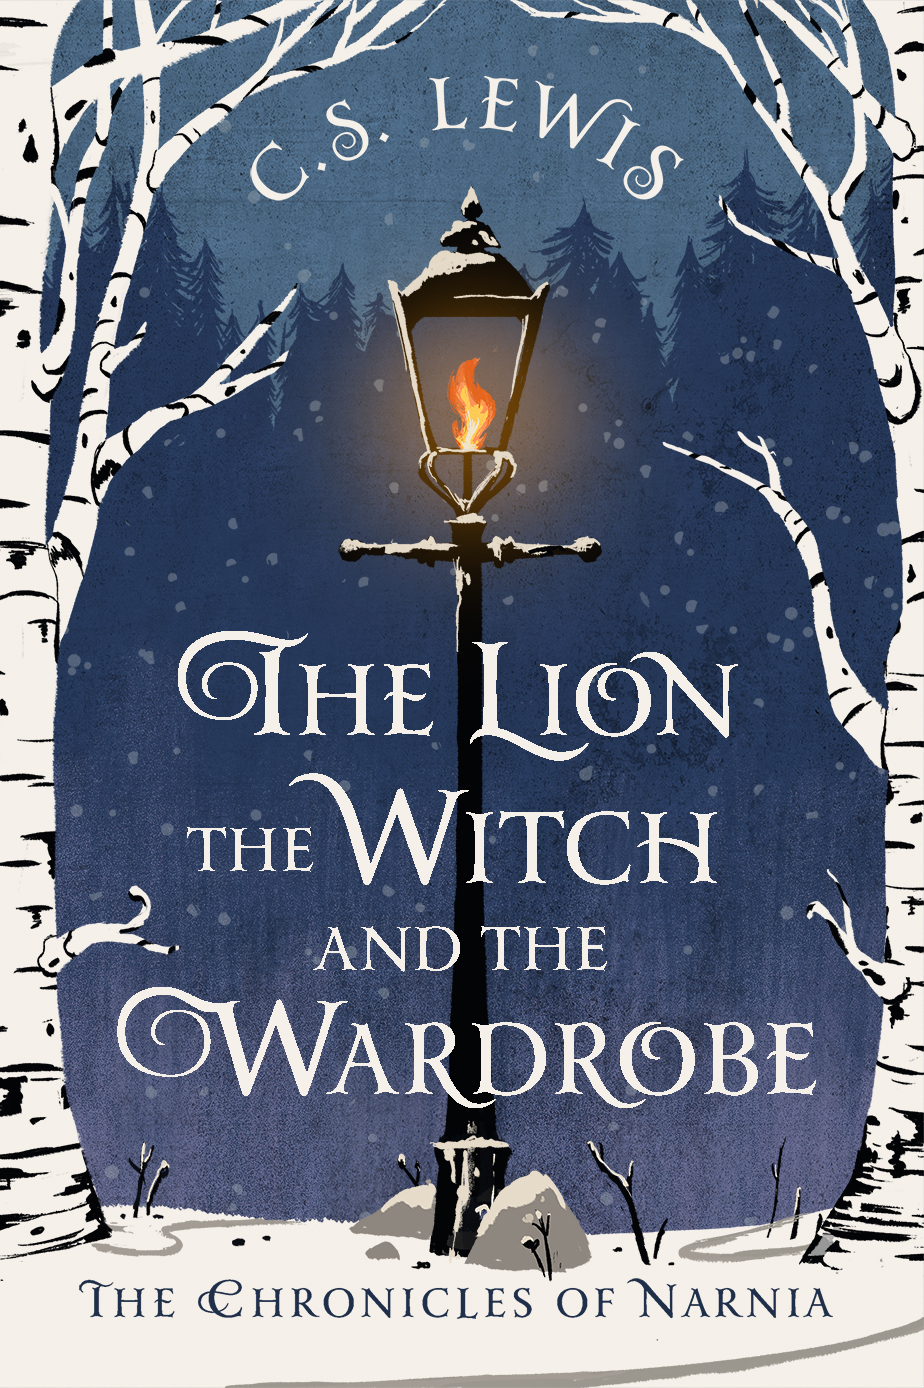 The Lion, the Witch, and the Wardrobe: Book Cover on Behance